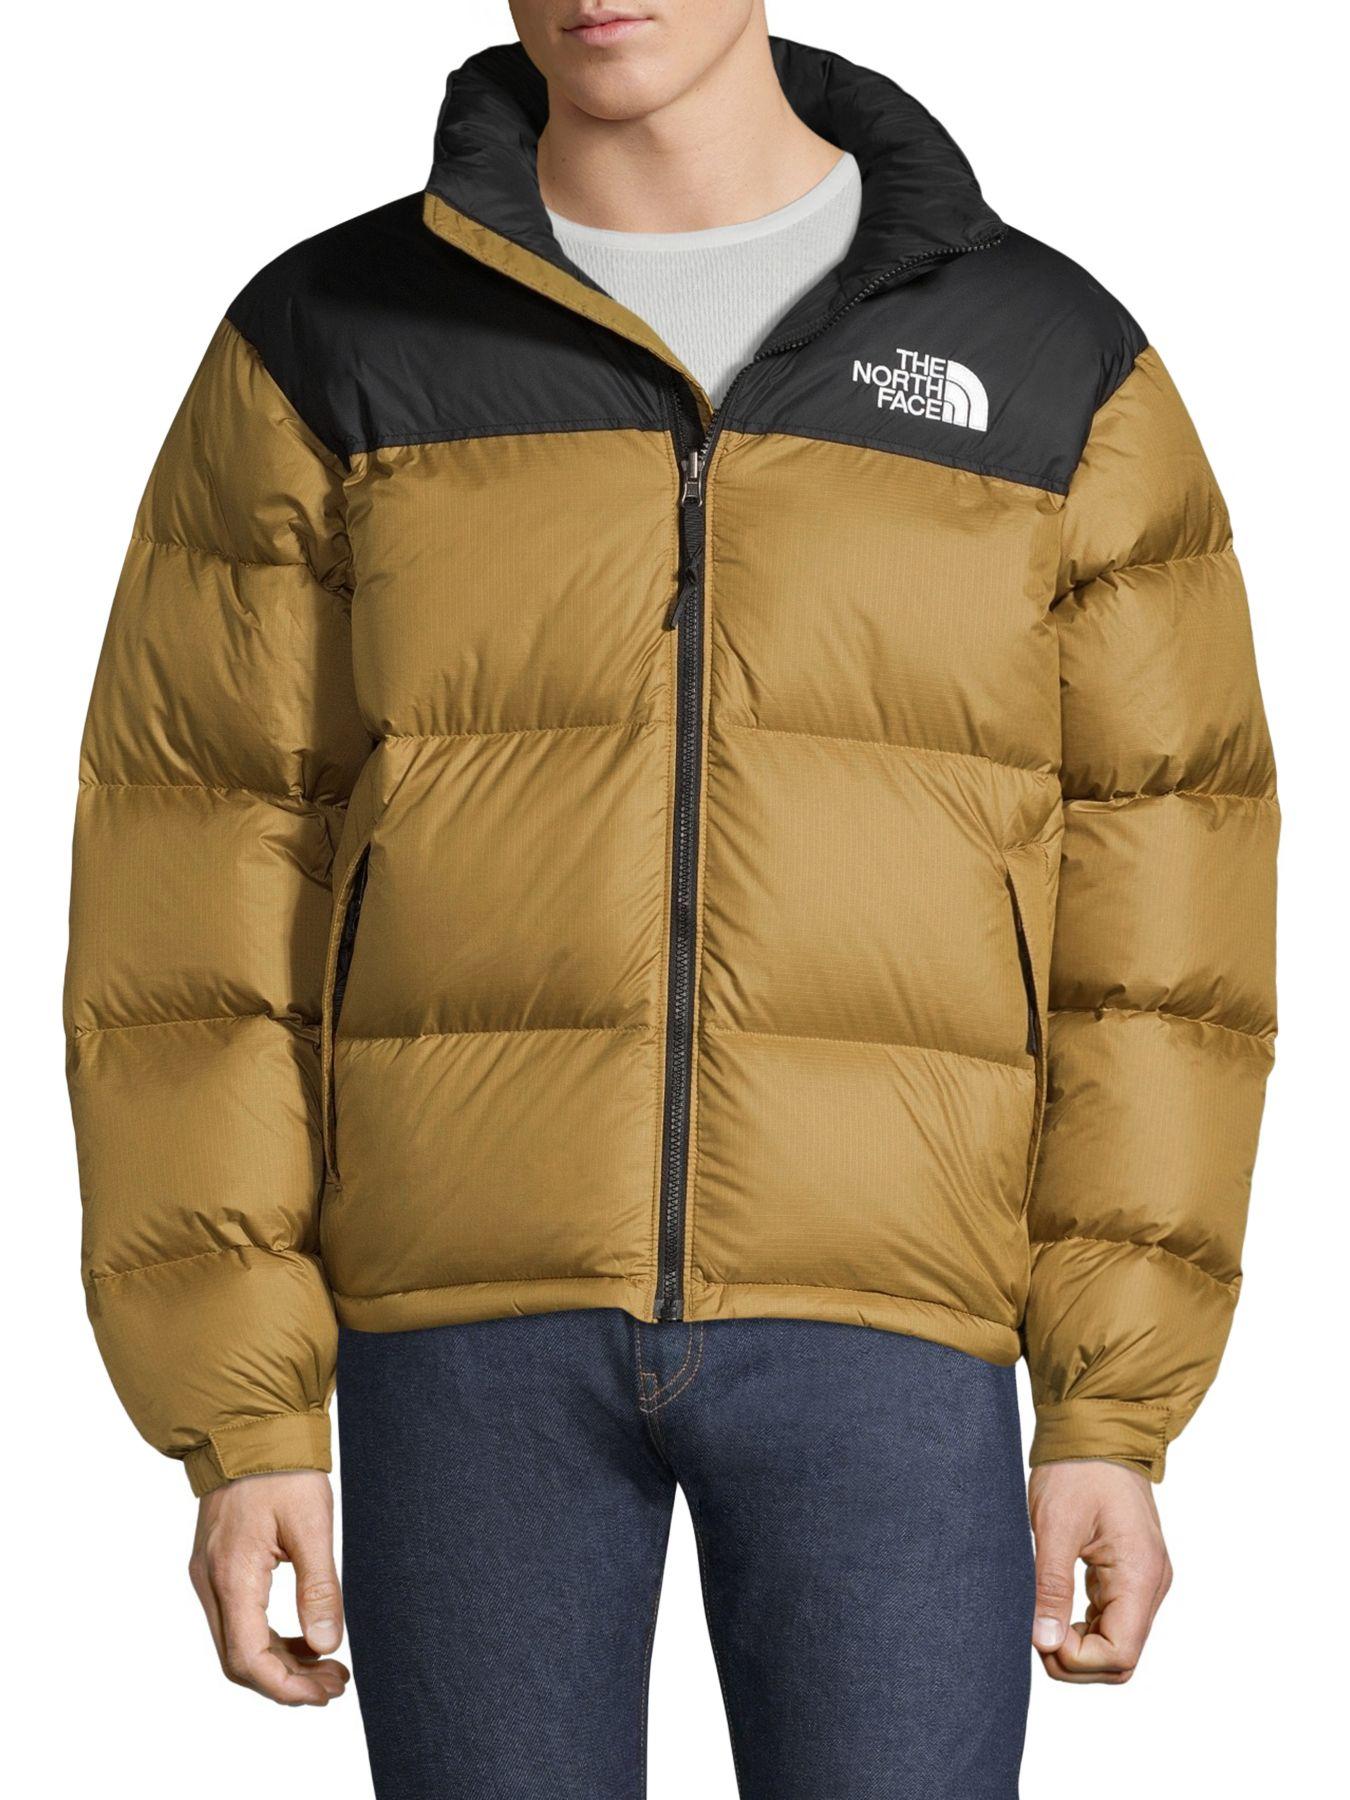 The North Face Goose 1996 Retro Nuptse Jacket for Men - Save 68 